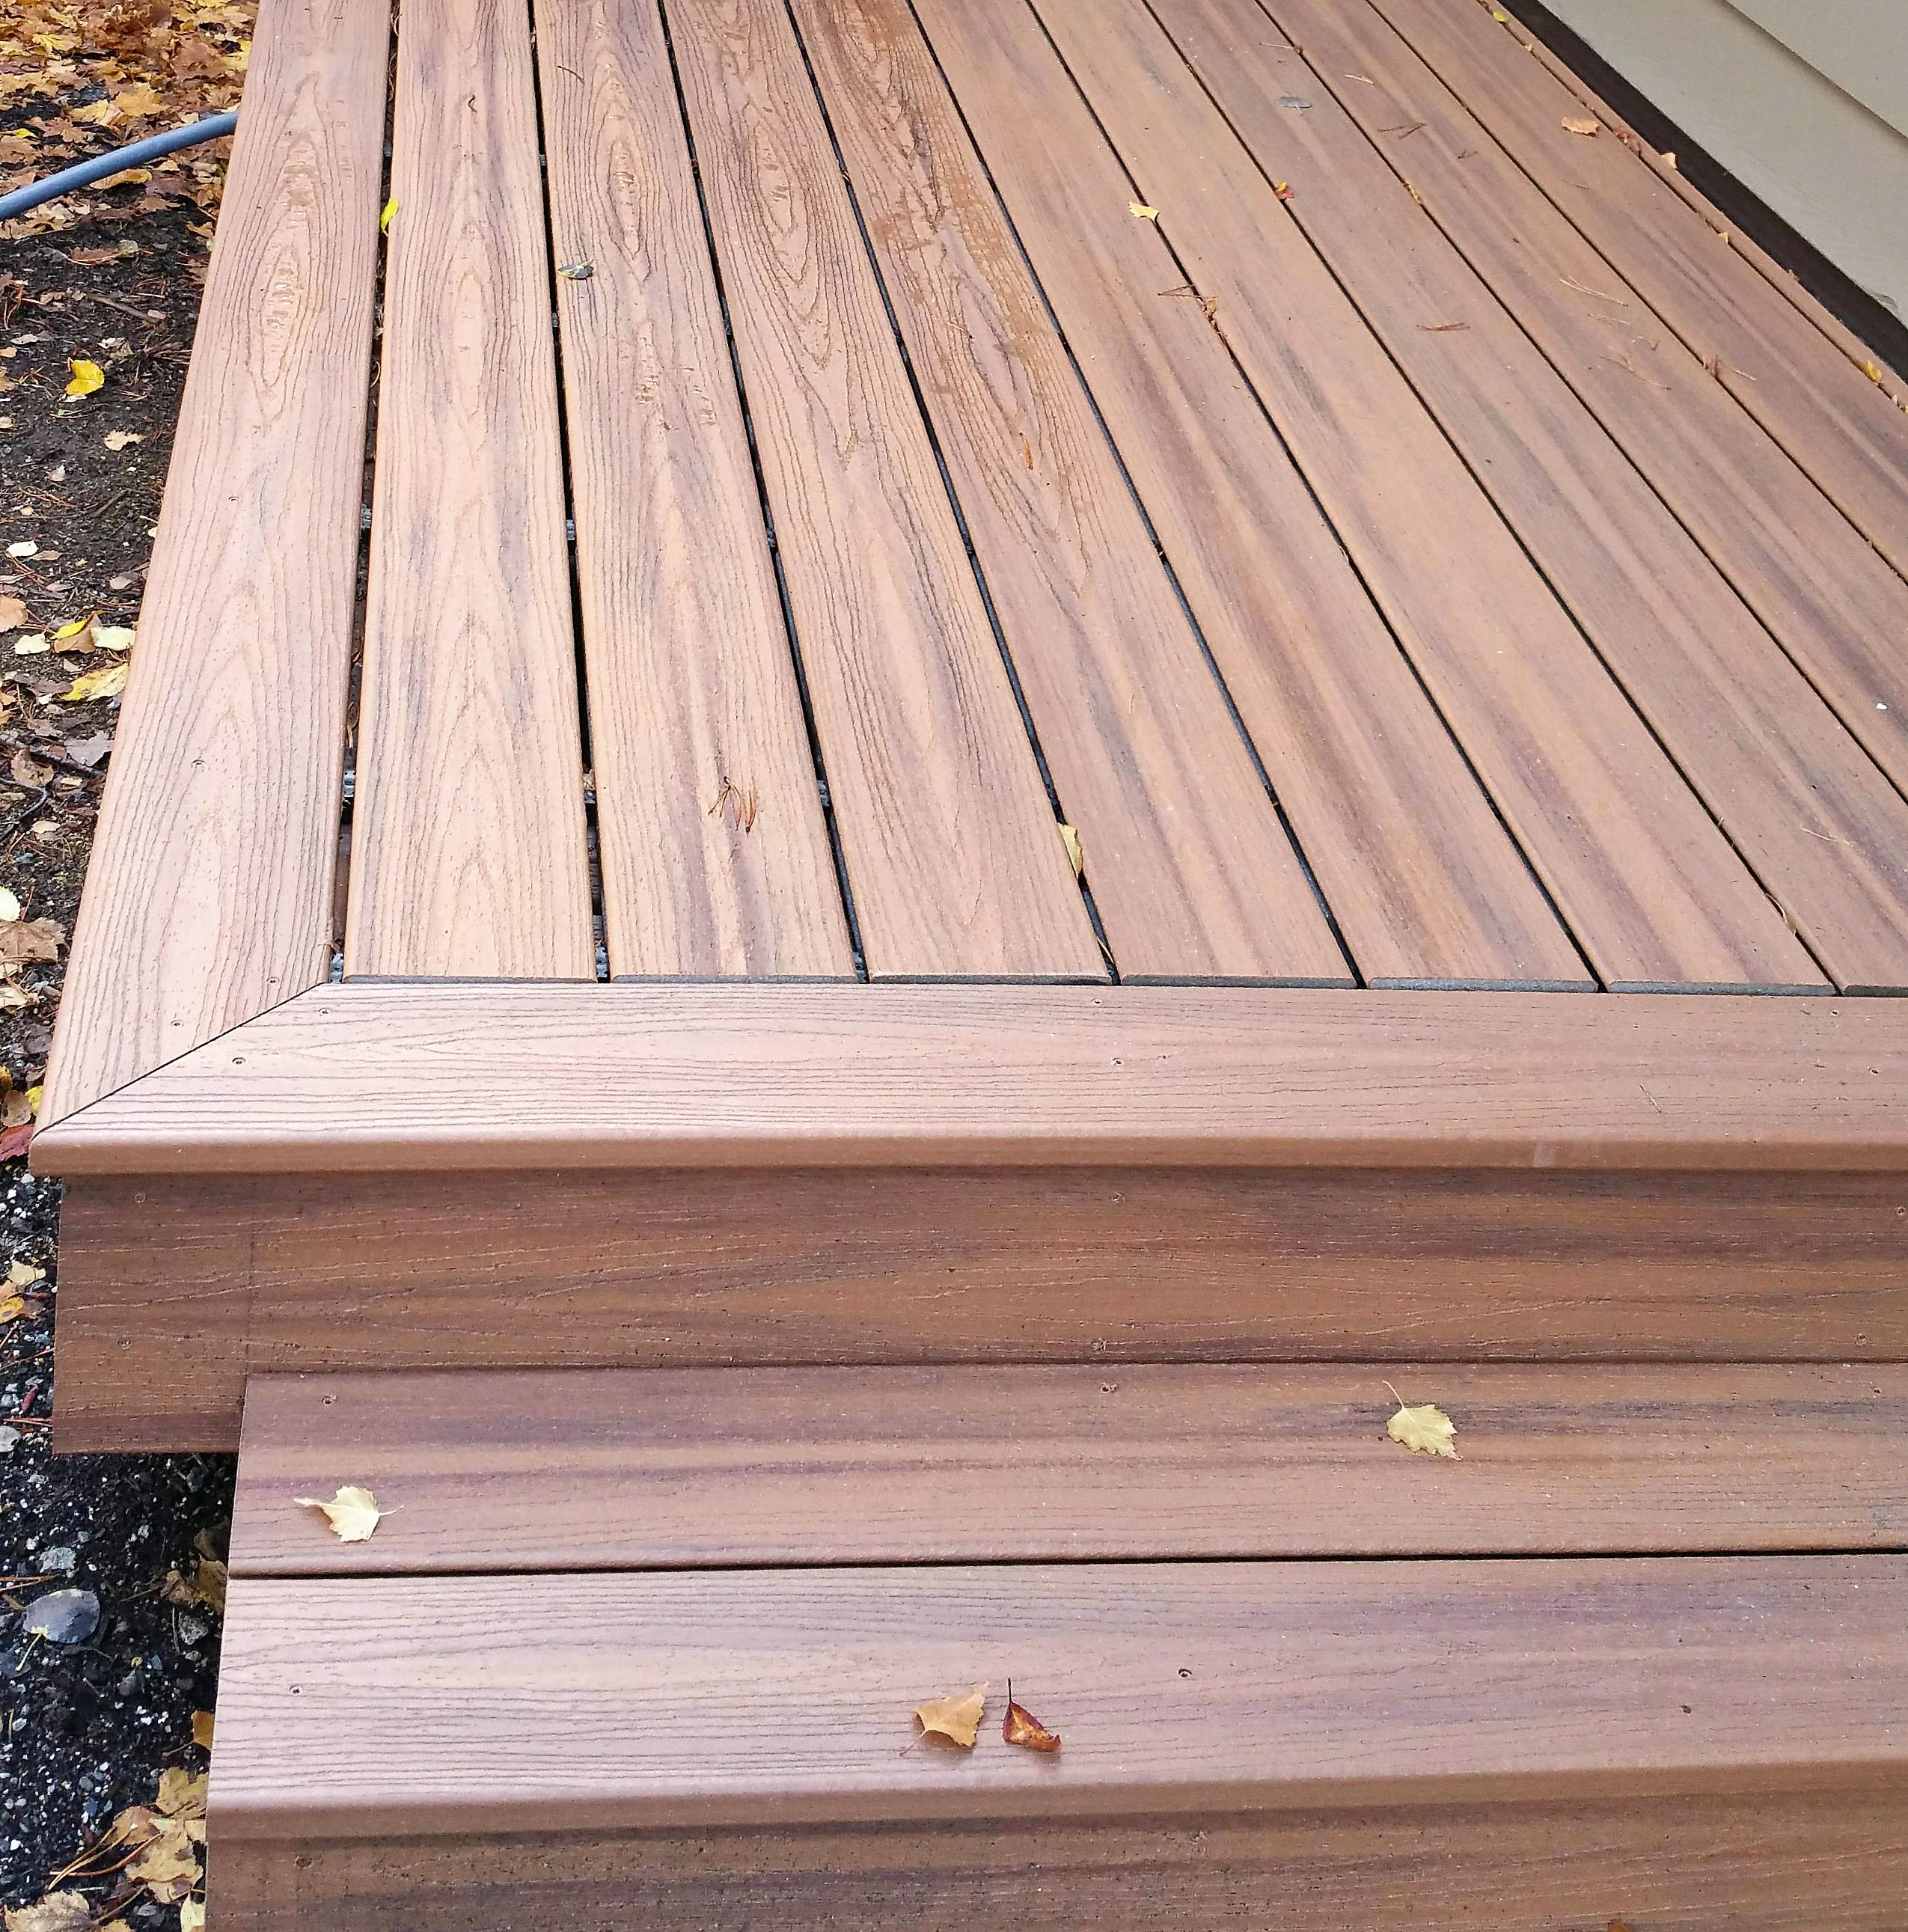 Wood Or Composite Deck Better Decking Deck Porch Railings pertaining to sizing 2550 X 2582